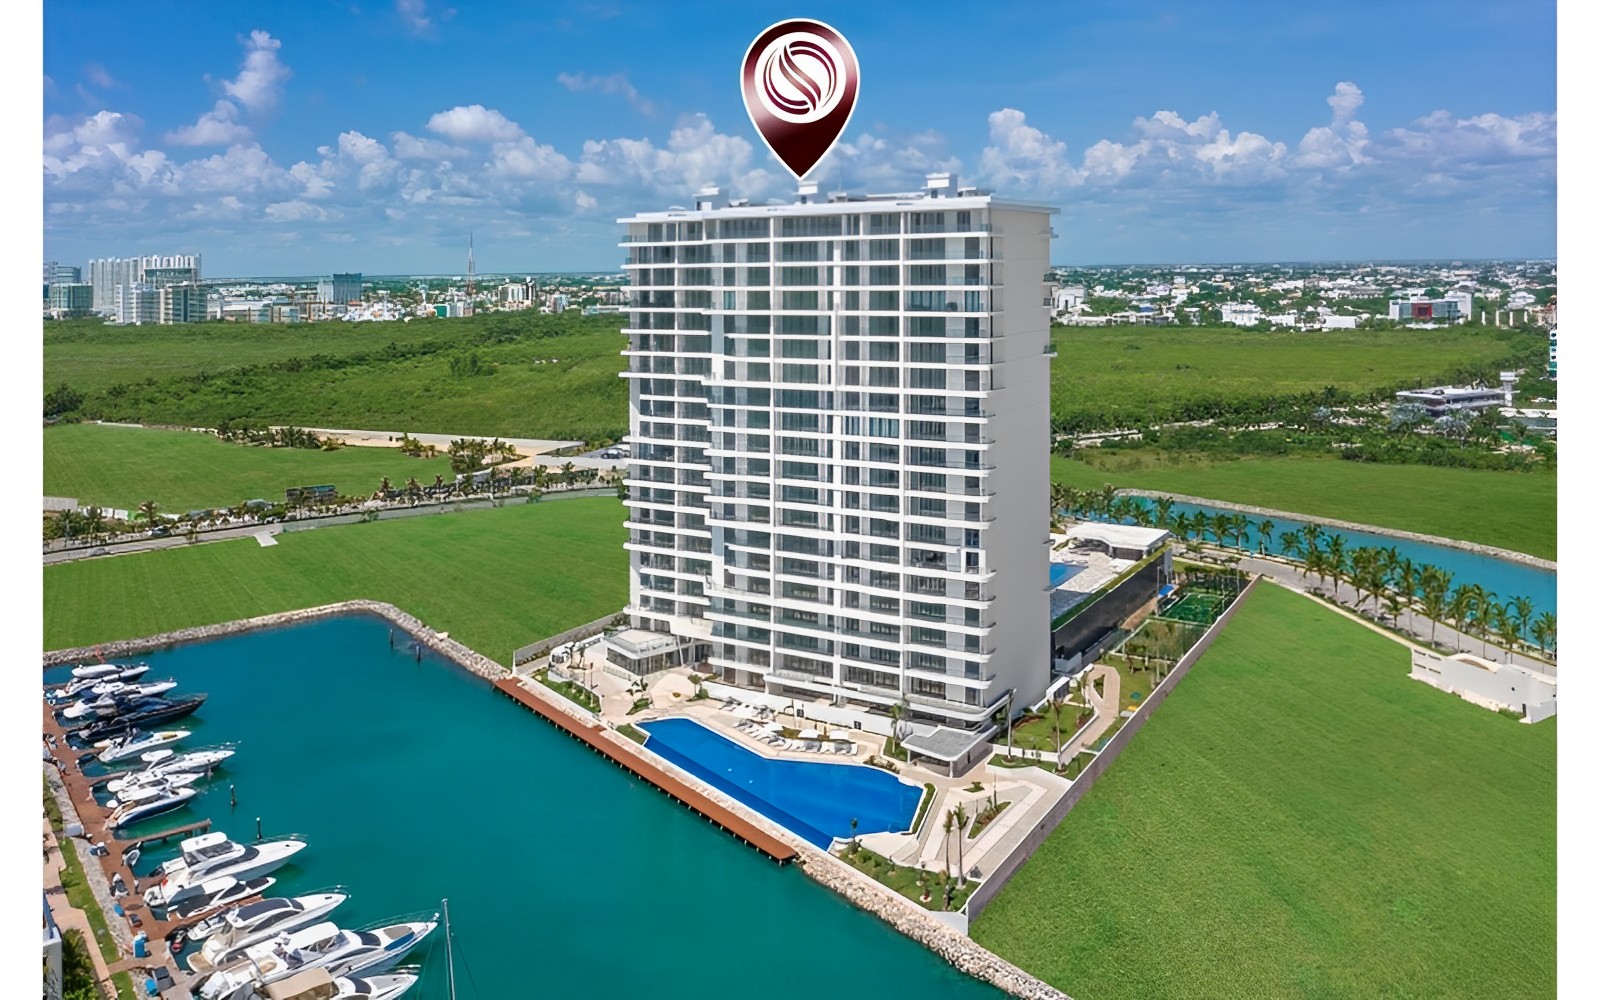 Apartment with garden, infinity pool, jacuzzi, snack bar, service room, pre-construction, in Puerto Cancun